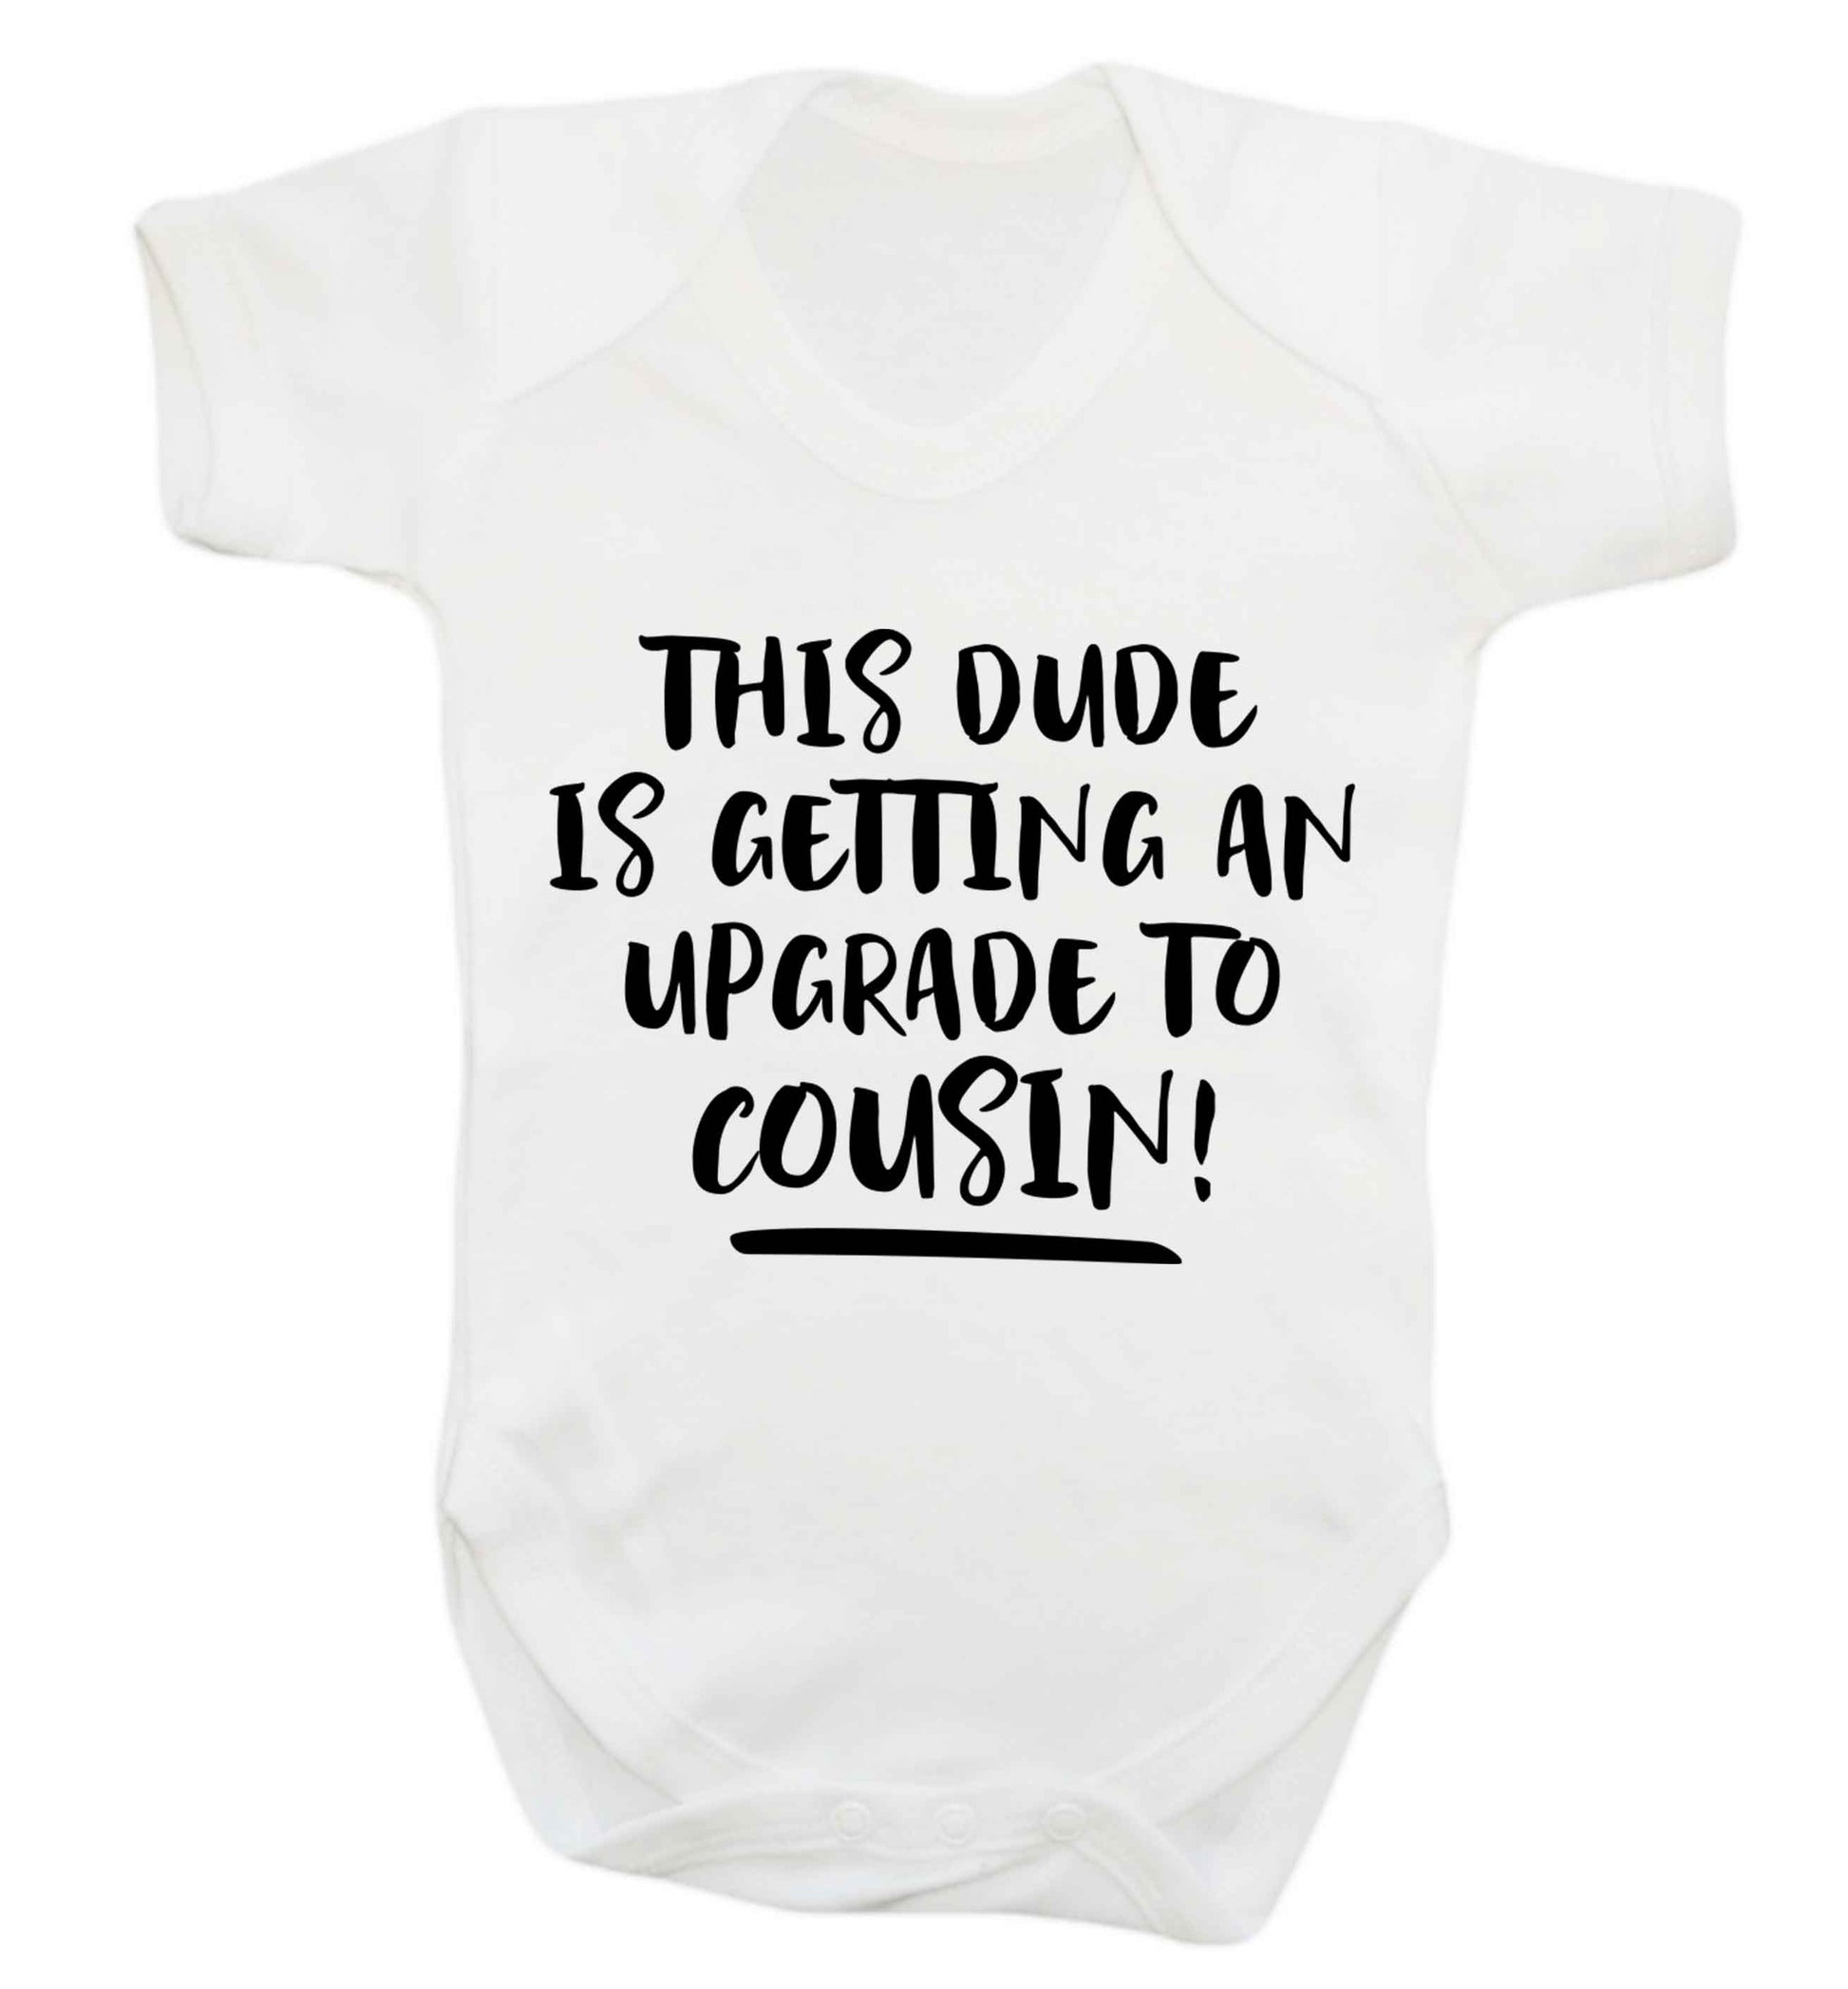 This dude is getting an upgrade to cousin! Baby Vest white 18-24 months